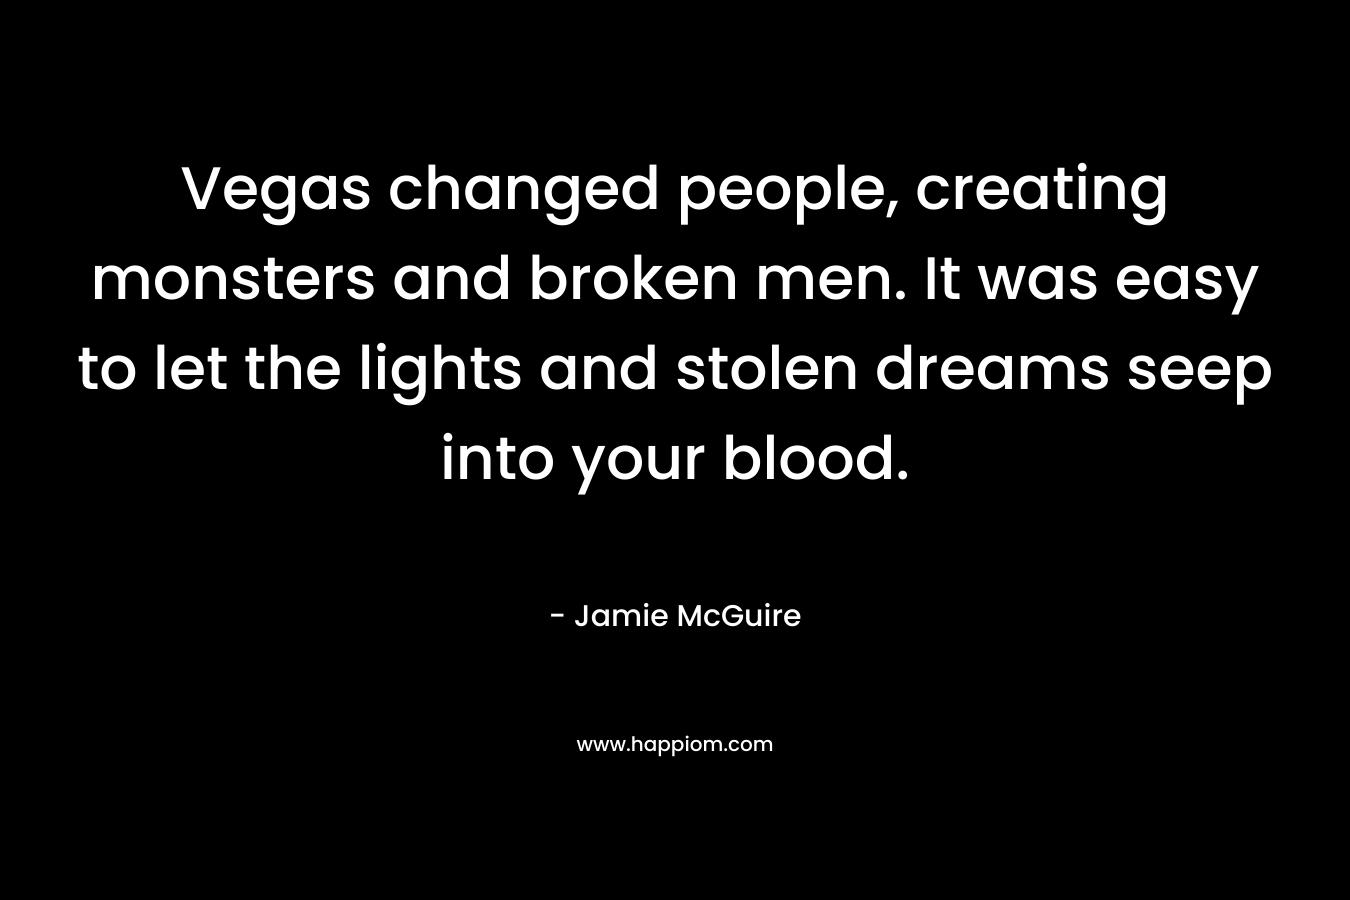 Vegas changed people, creating monsters and broken men. It was easy to let the lights and stolen dreams seep into your blood. – Jamie McGuire